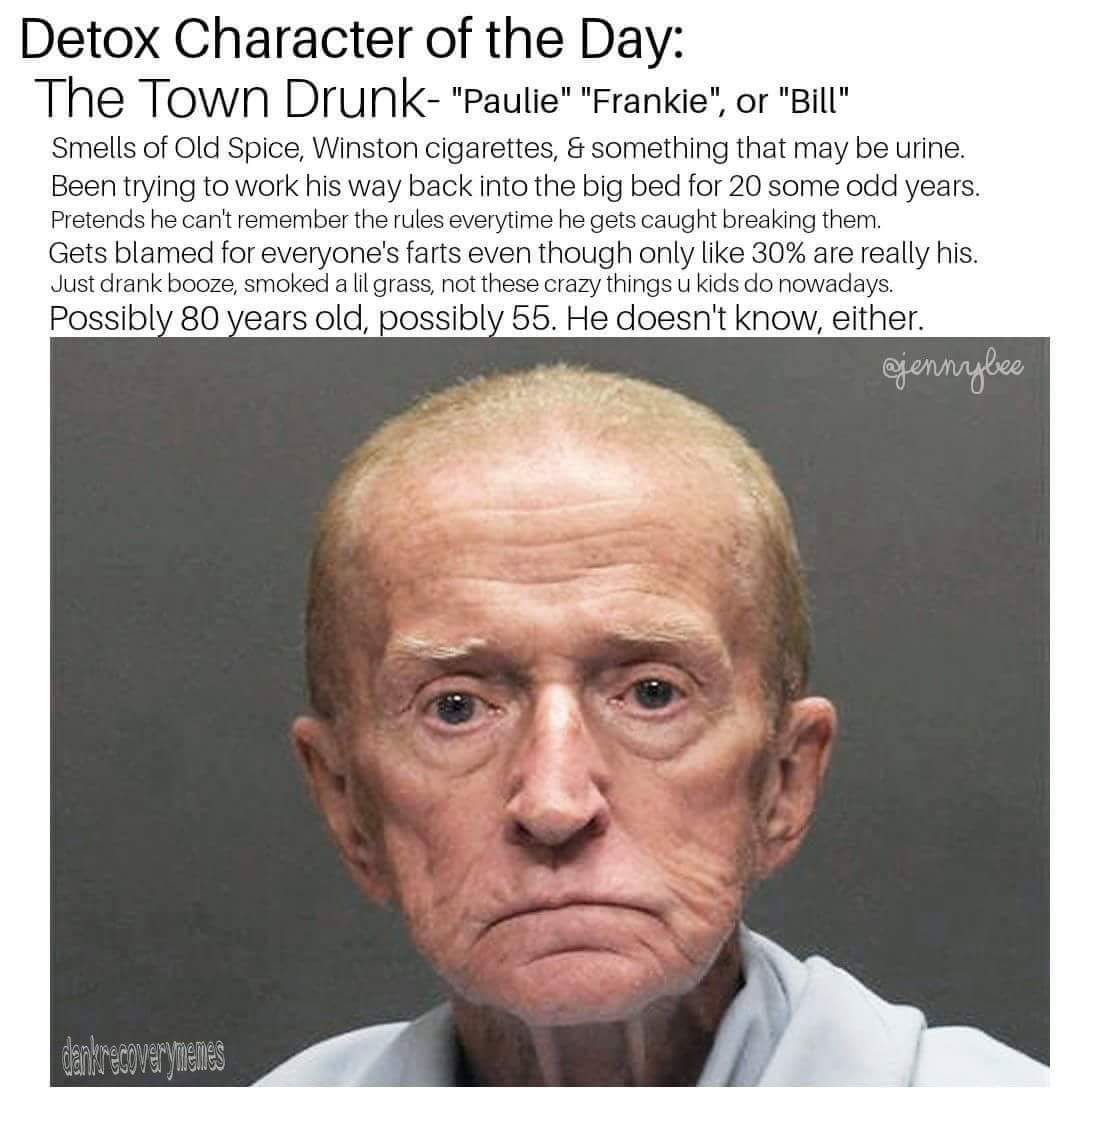 detox character of the day - Detox Character of the Day The Town Drunk "Paulie" "Frankie", or "Bill" Smells of Old Spice, Winston cigarettes, & something that may be urine. Been trying to work his way back into the big bed for 20 some odd years. Pretends 